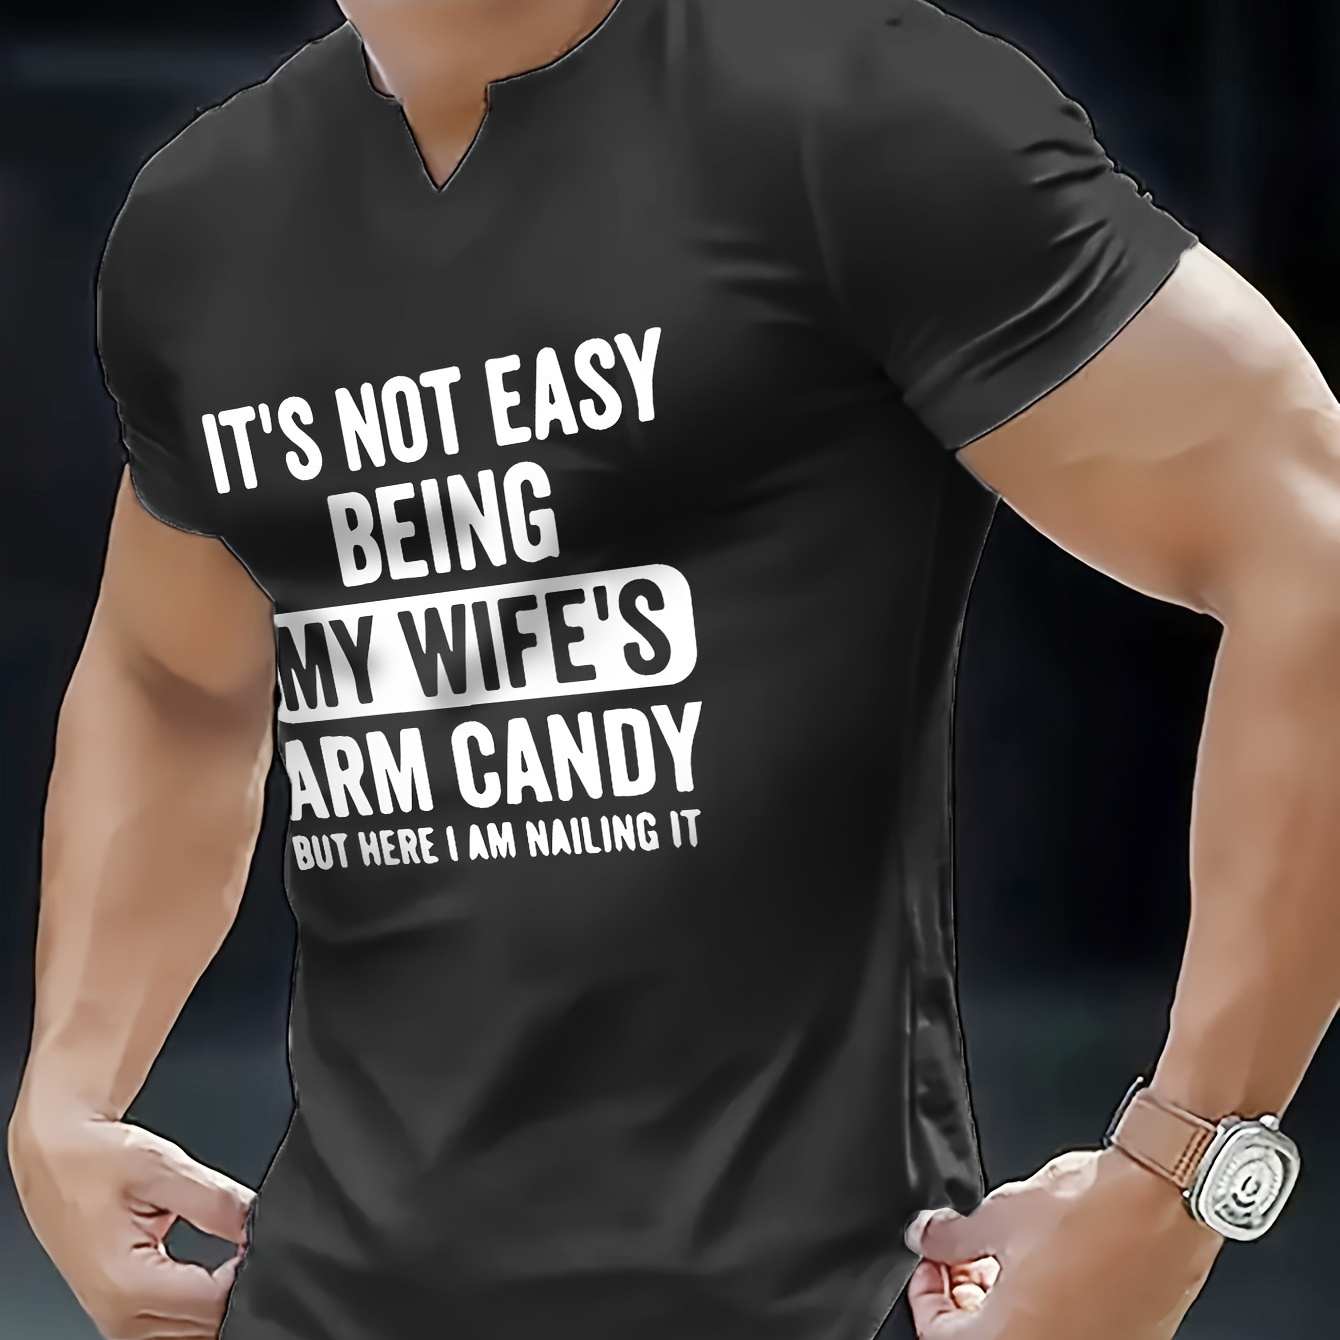 

It's Not Easy Being My Wife's Arm Candy"creative Print Summer Casual T-shirt Short Sleeve For Men, Sporty Leisure Style, Fashion Crew Neck Top For Daily Wear